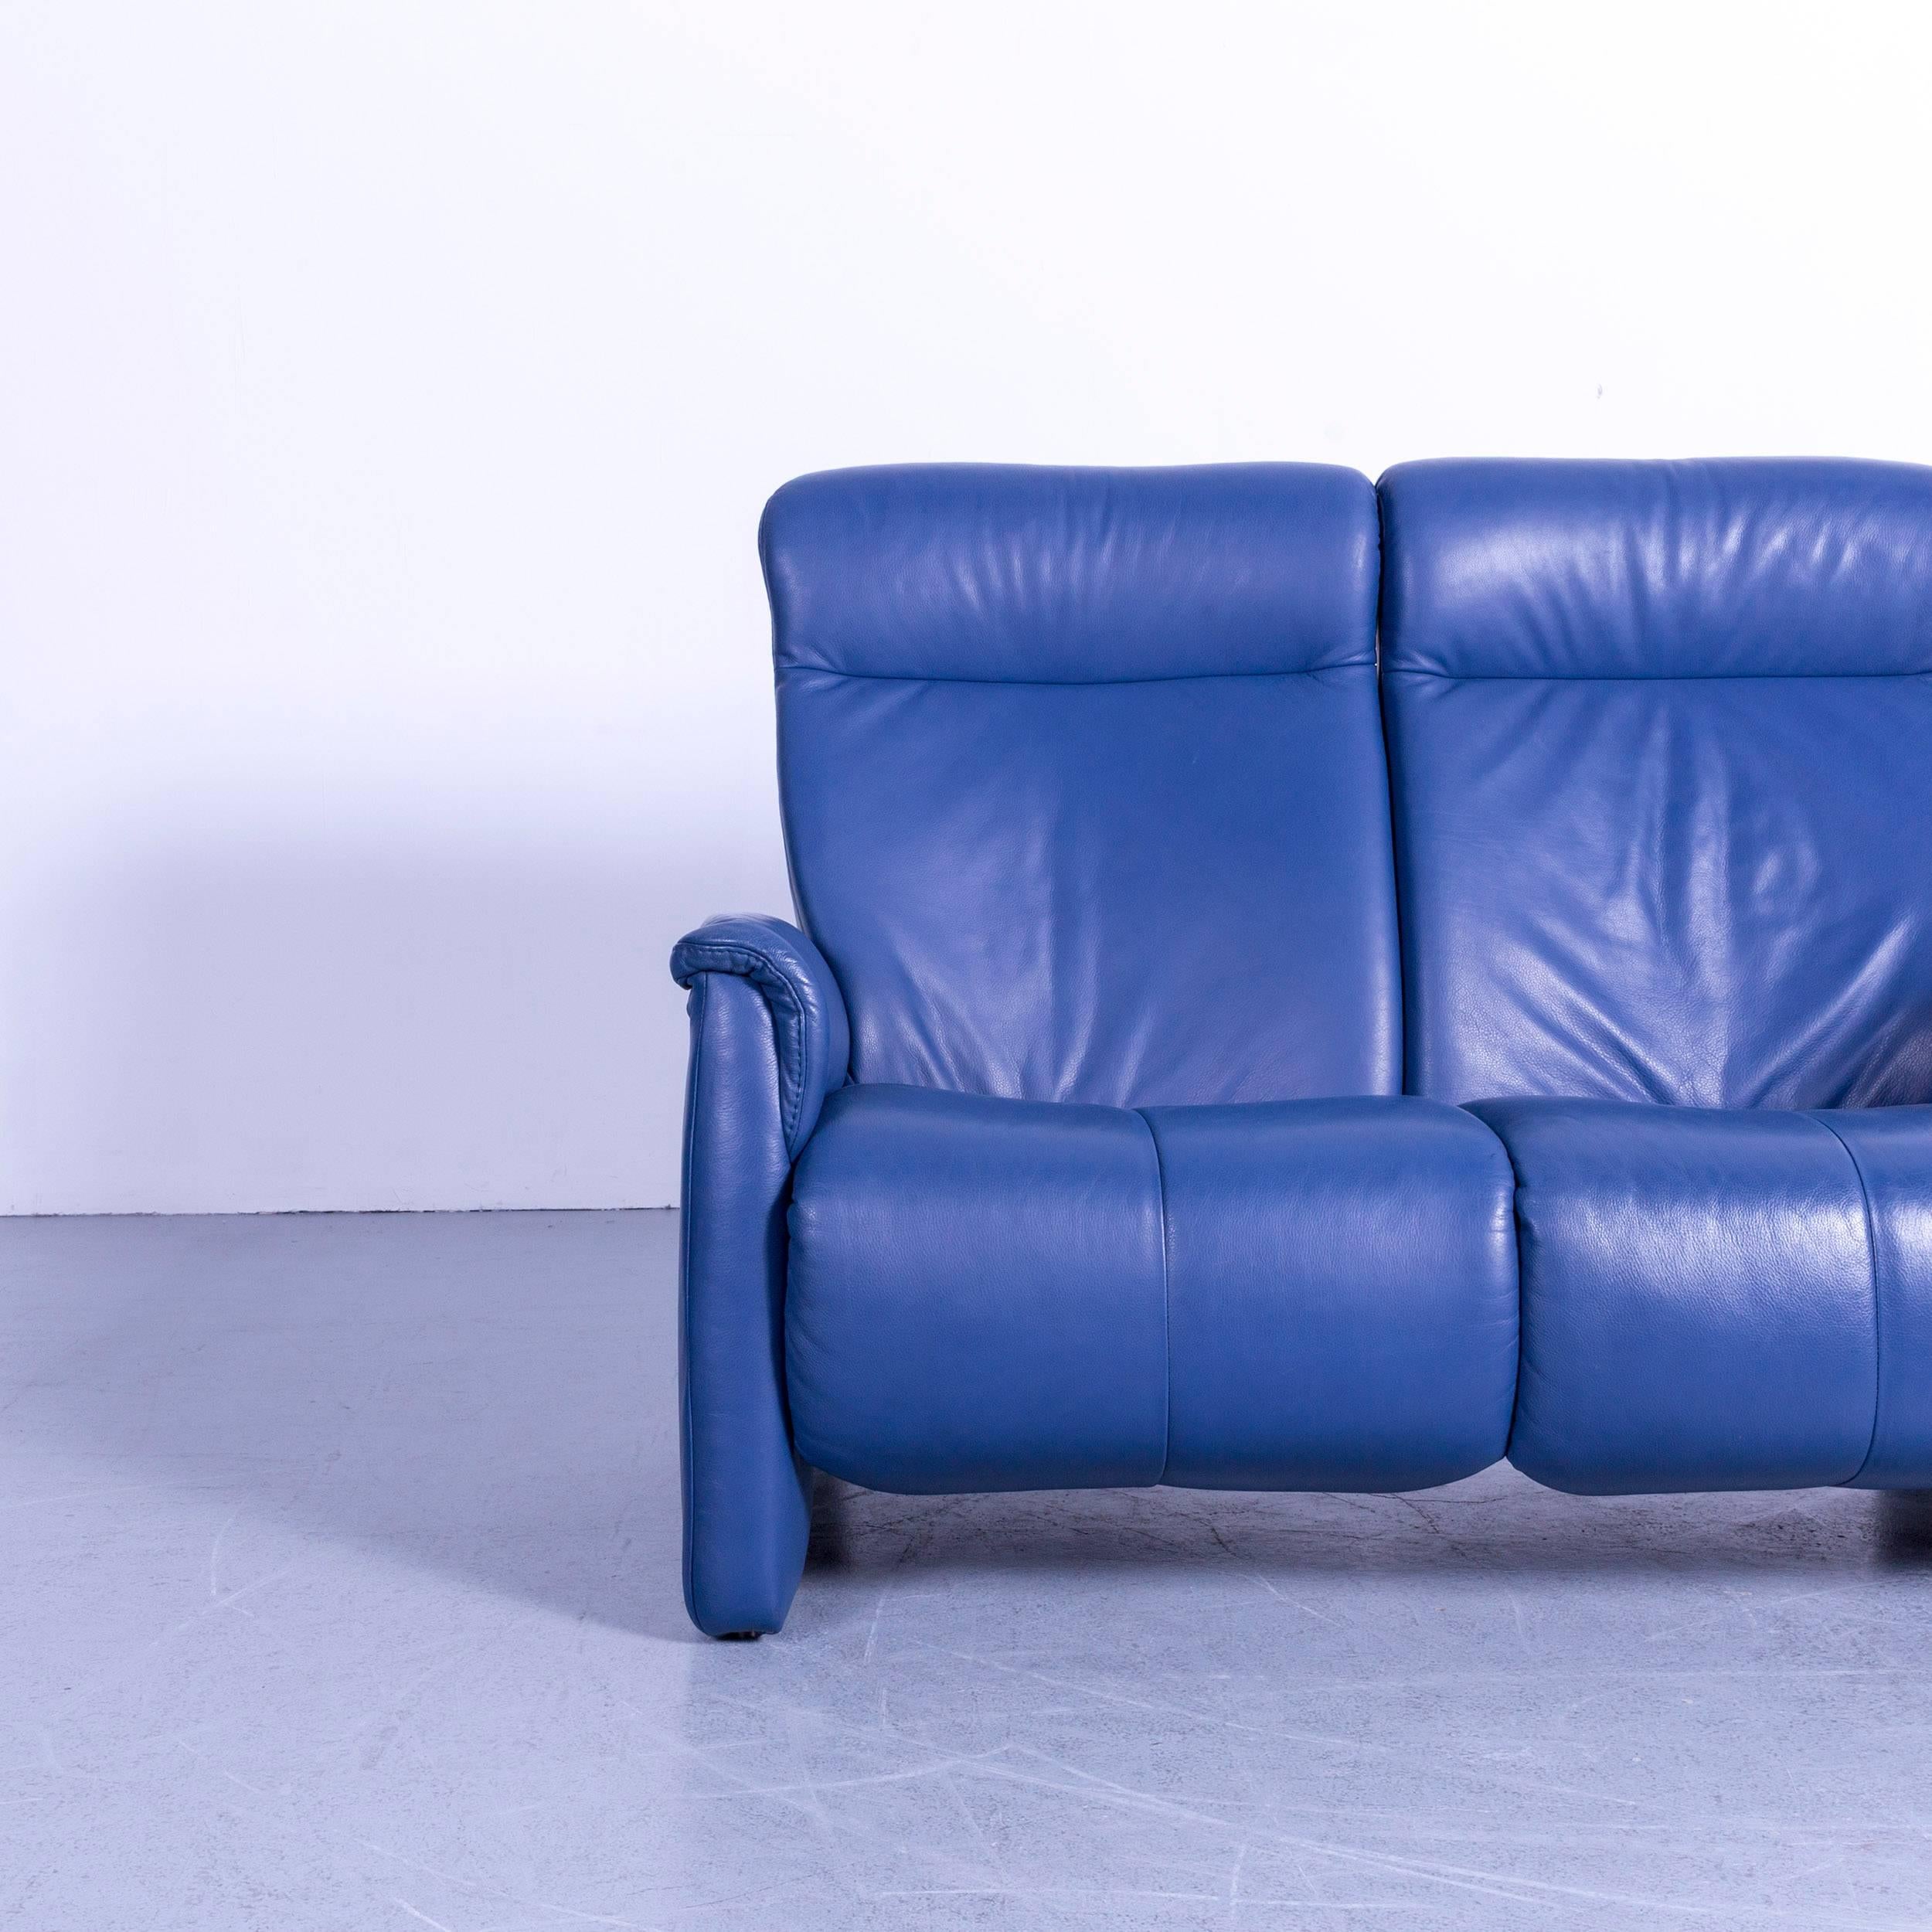 Contemporary Himolla Leather Sofa Blue Two-Seat Recliner